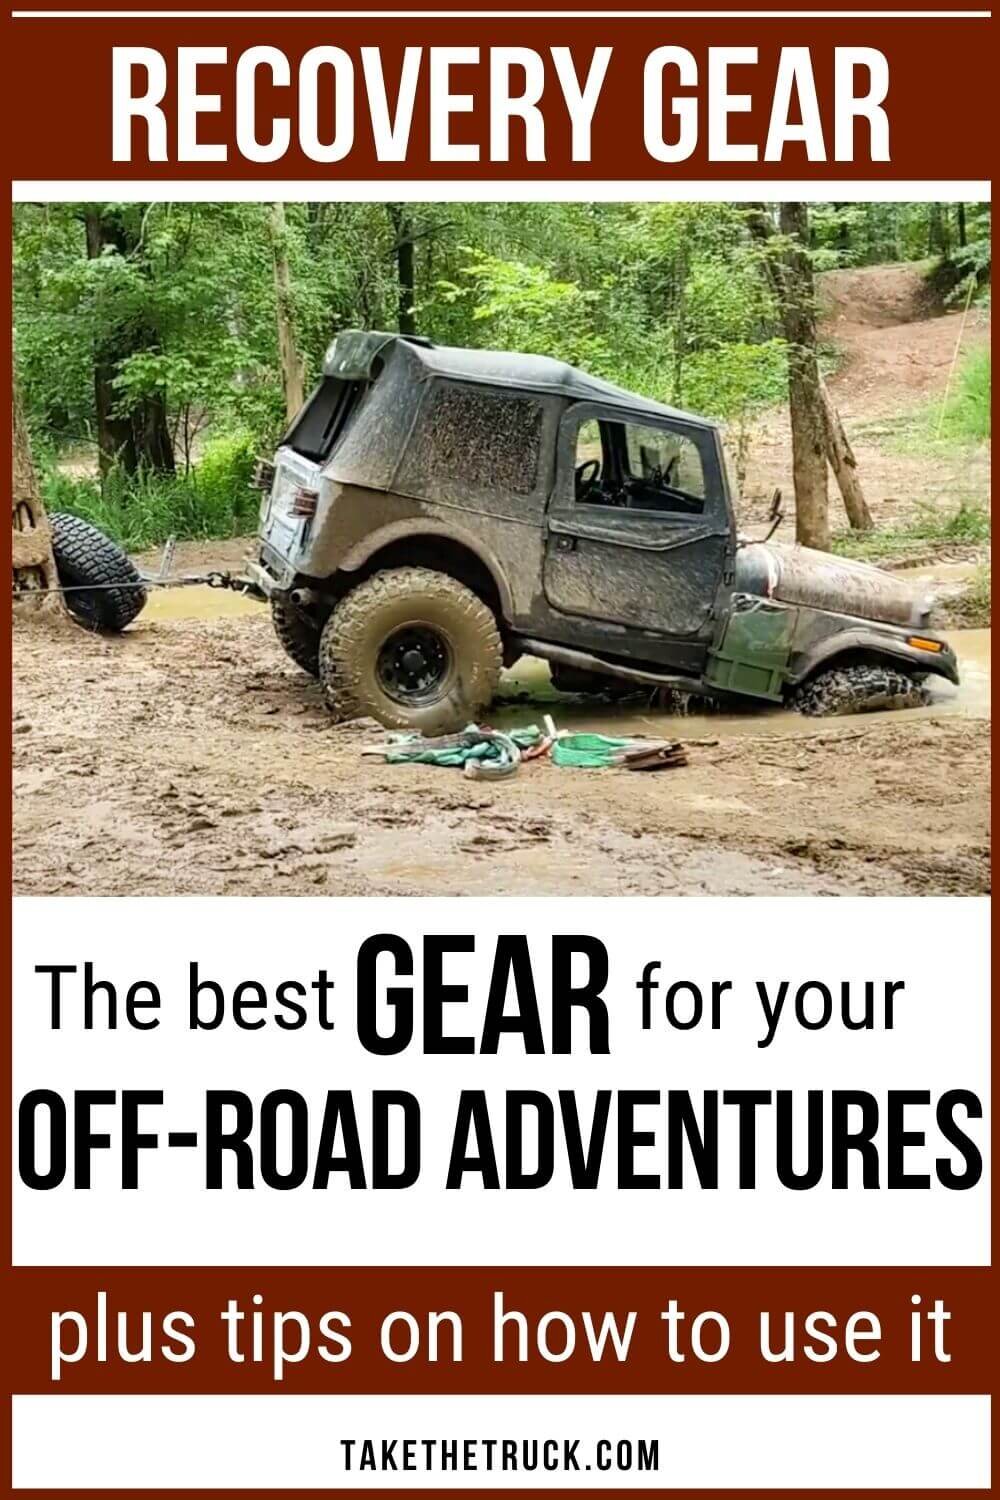 The best vehicle recovery equipment, off road recovery gear, and overland recovery kit for your overlanding rig. Be prepared in your off road recovery vehicle!